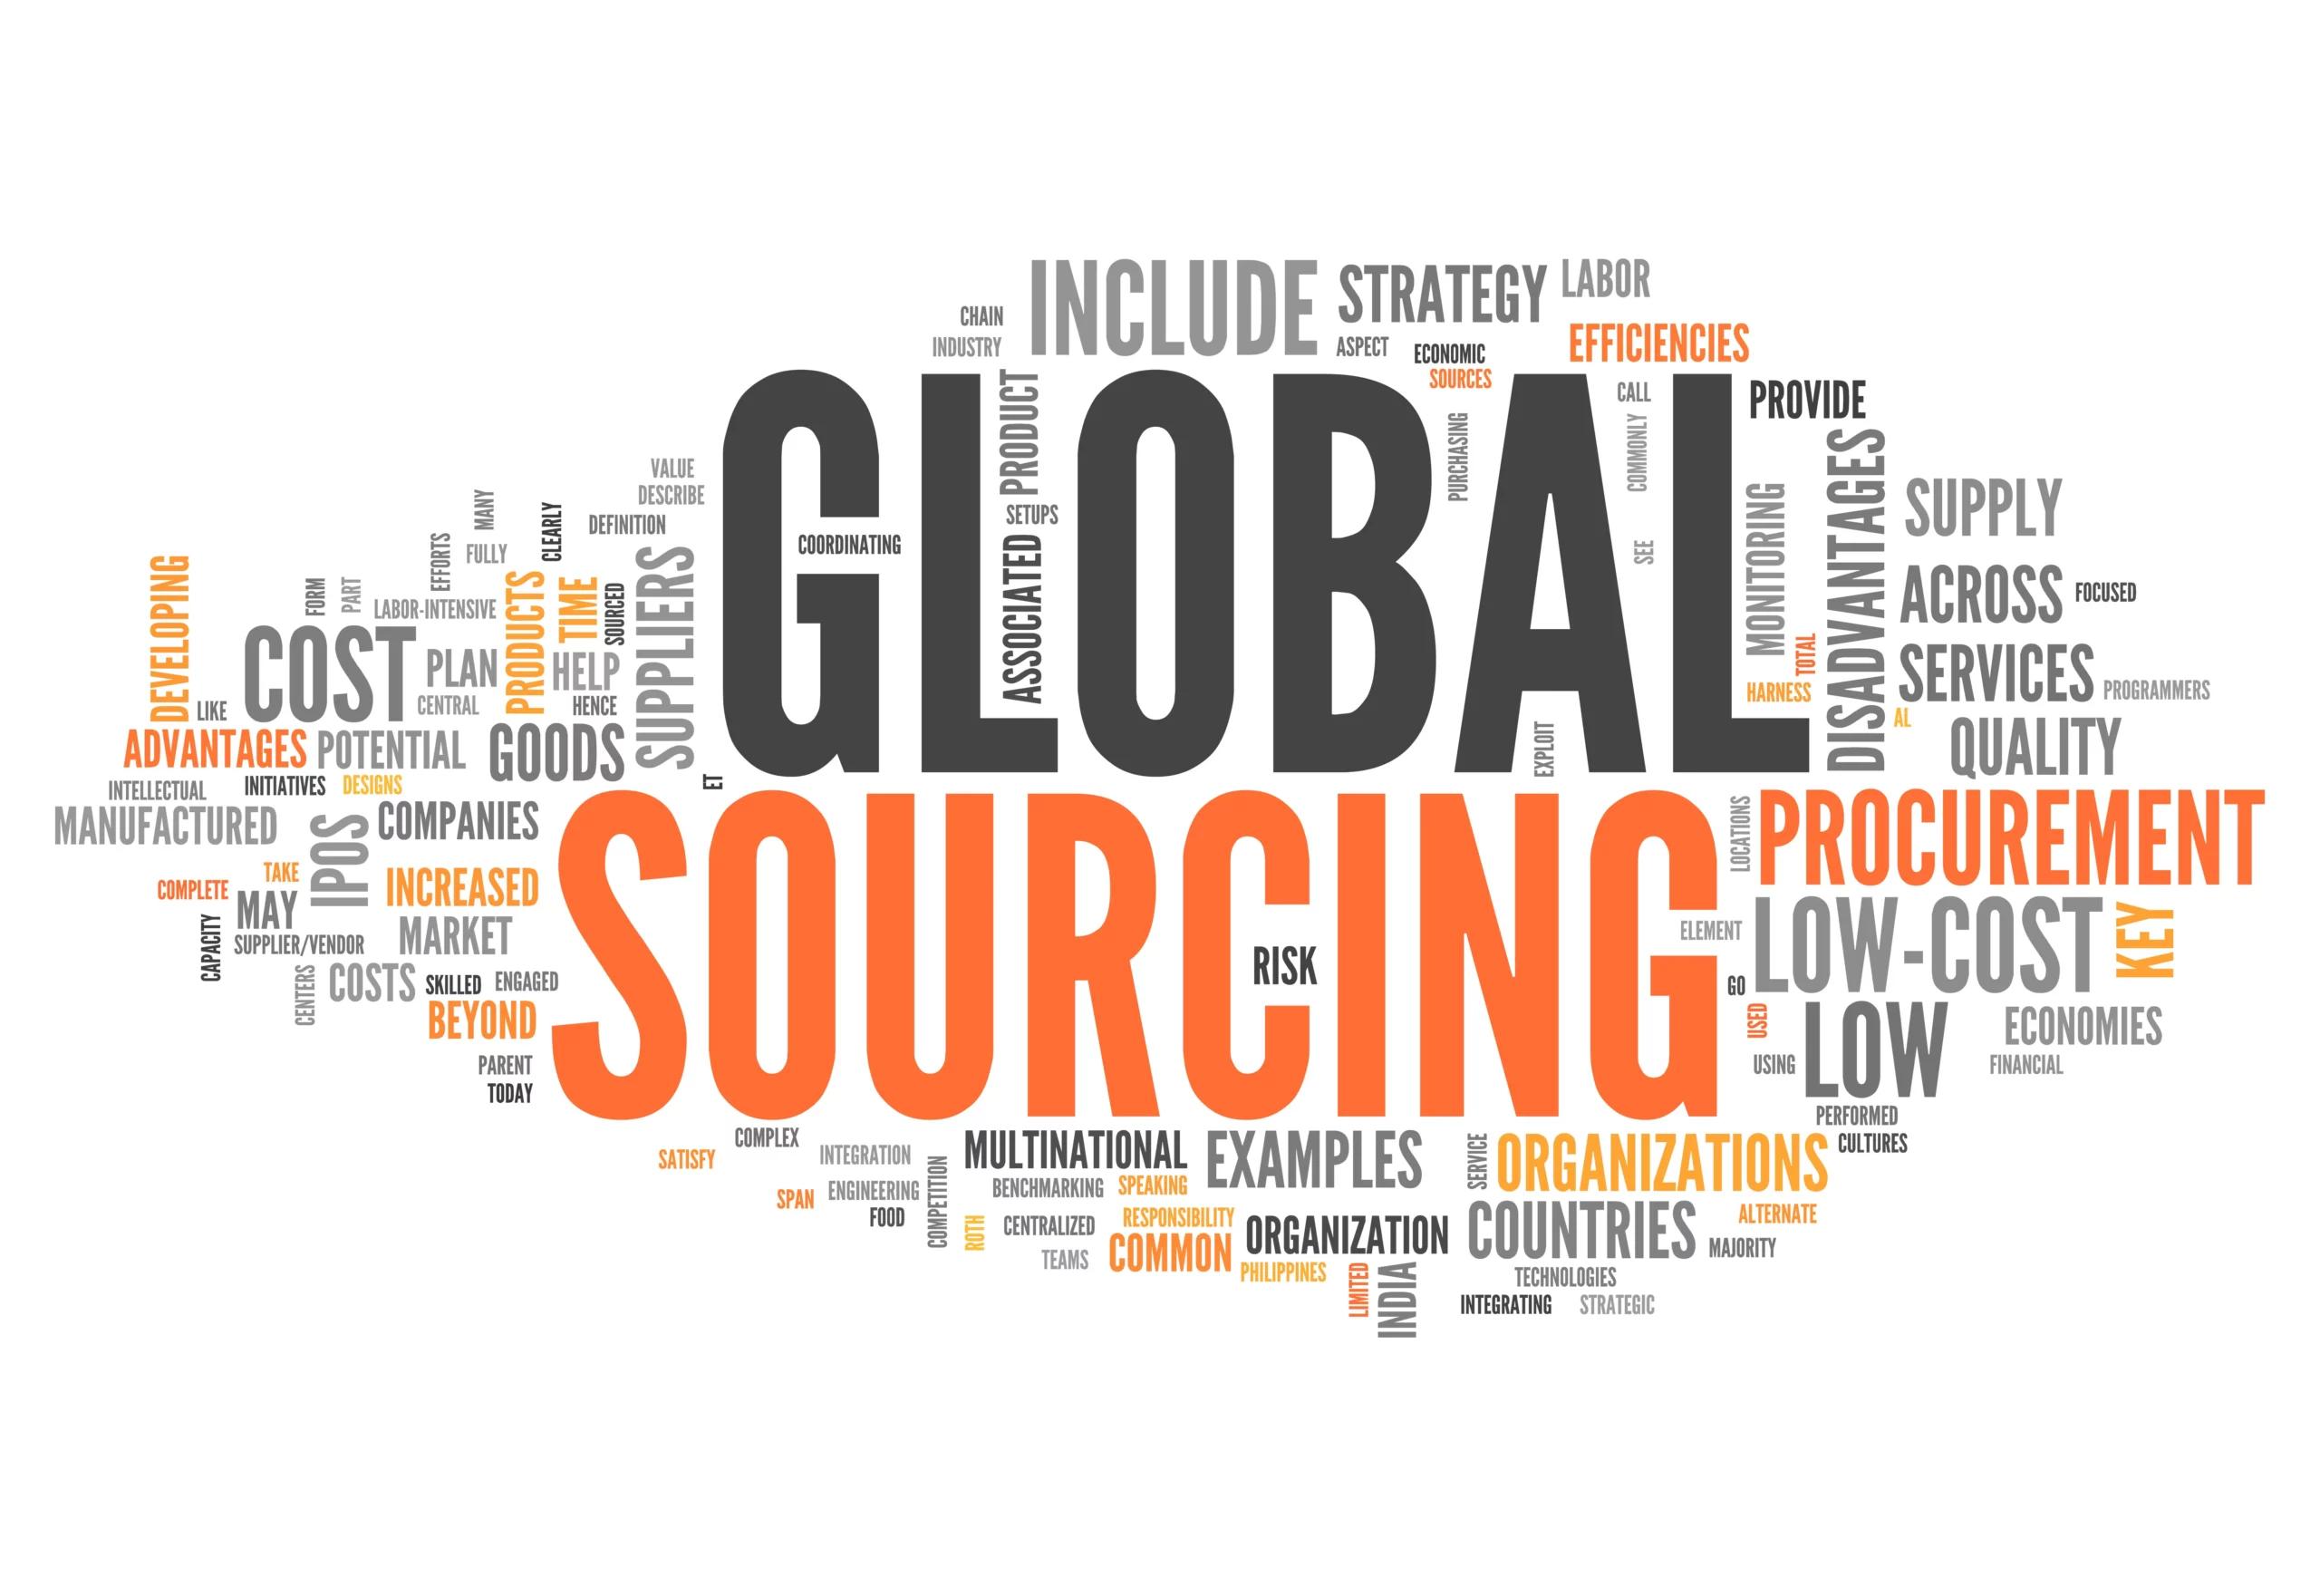 Product Sourcing and Procurement Services for over 30 years  - Austin Chemical, Inc. image